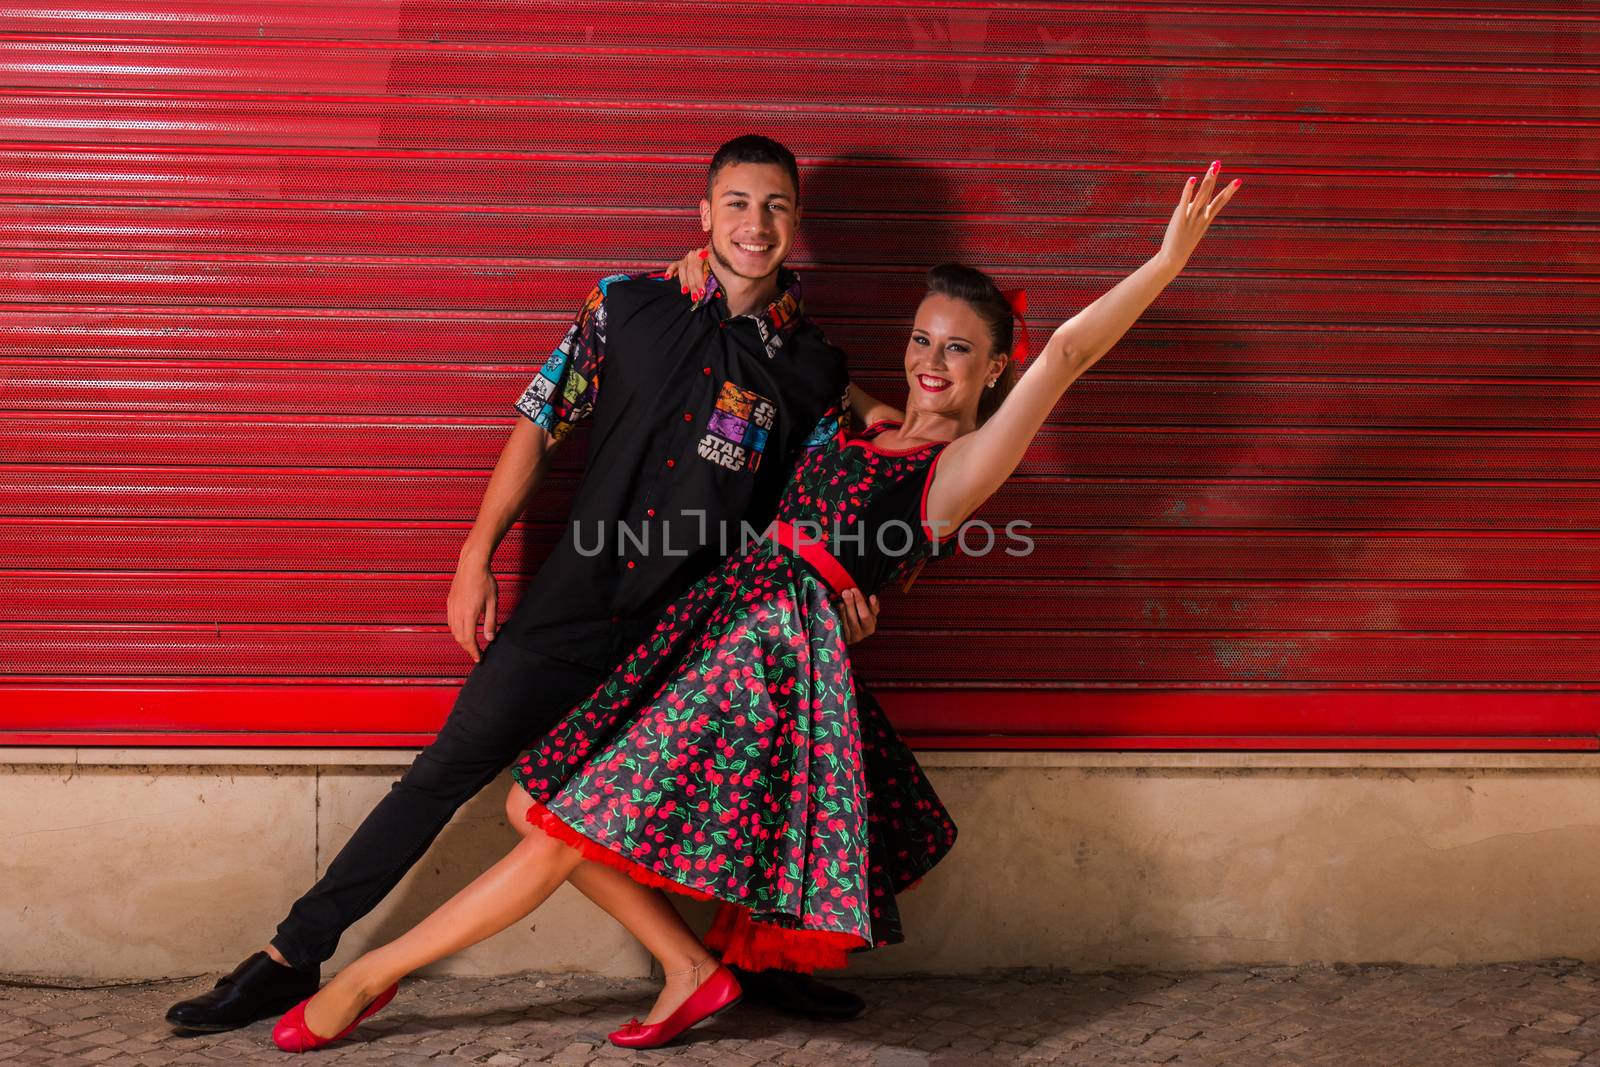 Vintage couple dancing over a red background.